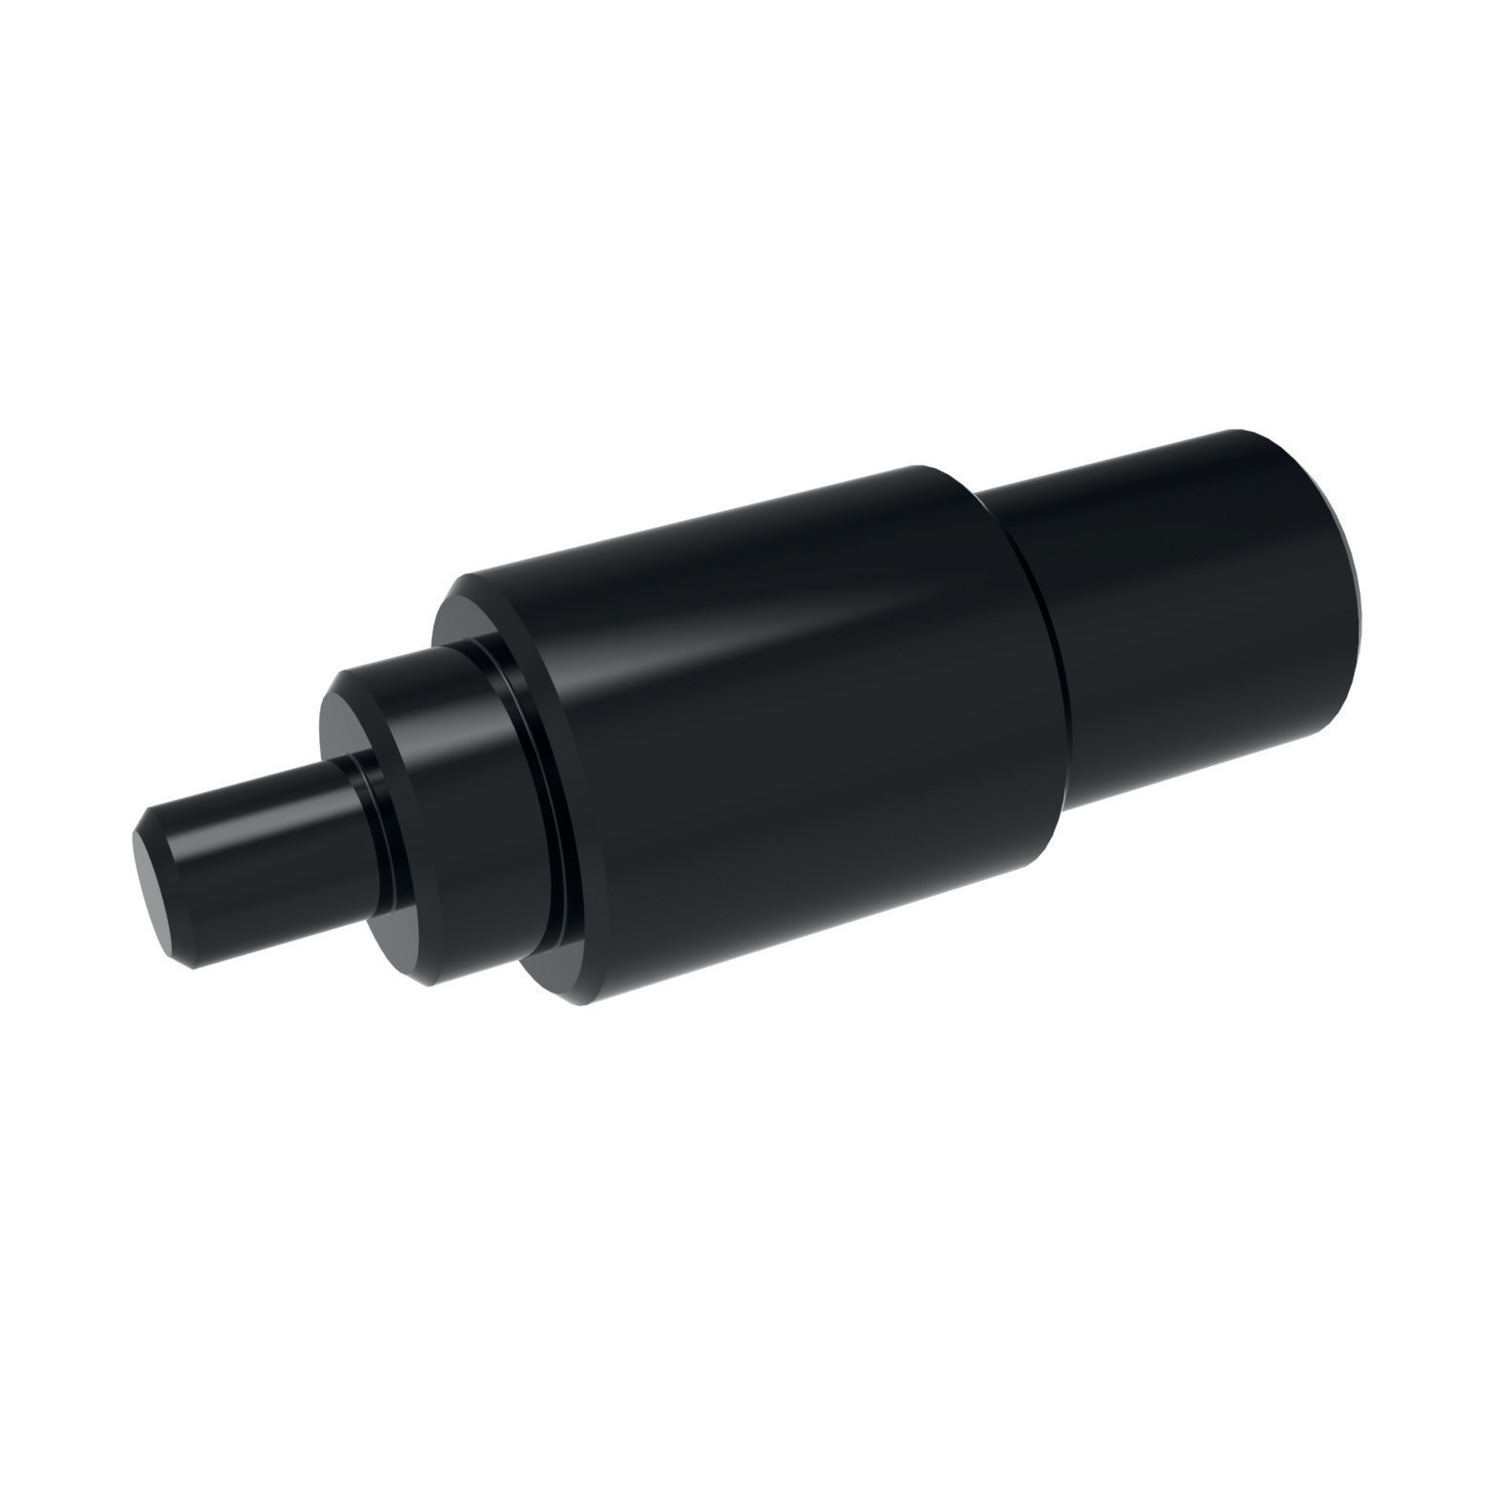 Product 22060, Installation Tool - Metric - Thinwall for threaded inserts 22000 & 22004 / 